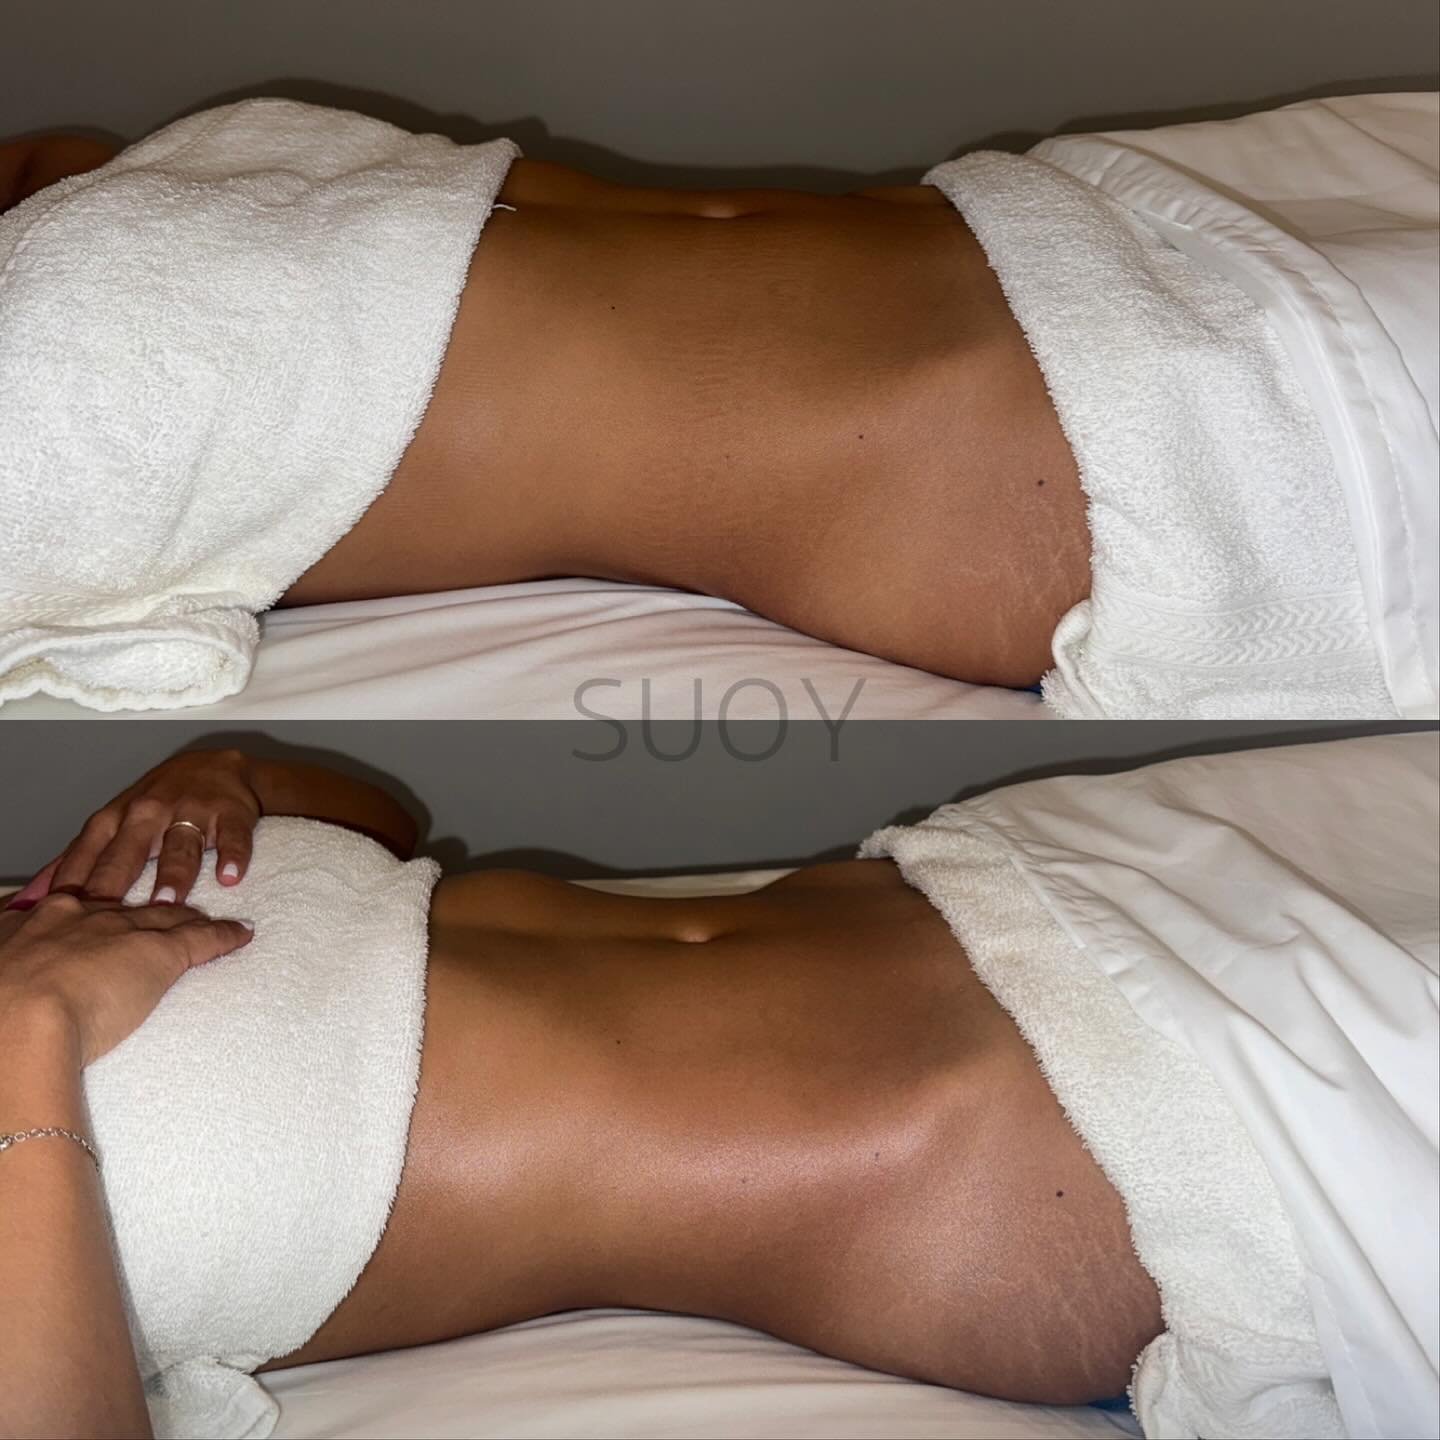 Brazilian Body Lymphatic Drainage Massage and Sculpting with techniques taught by Celebrity LMT Josie Rushing. 

Look what 50MINS can do! Top is before, bottom is after. 

We work on the WHOLE body! For us, this is more for health benefits than it is